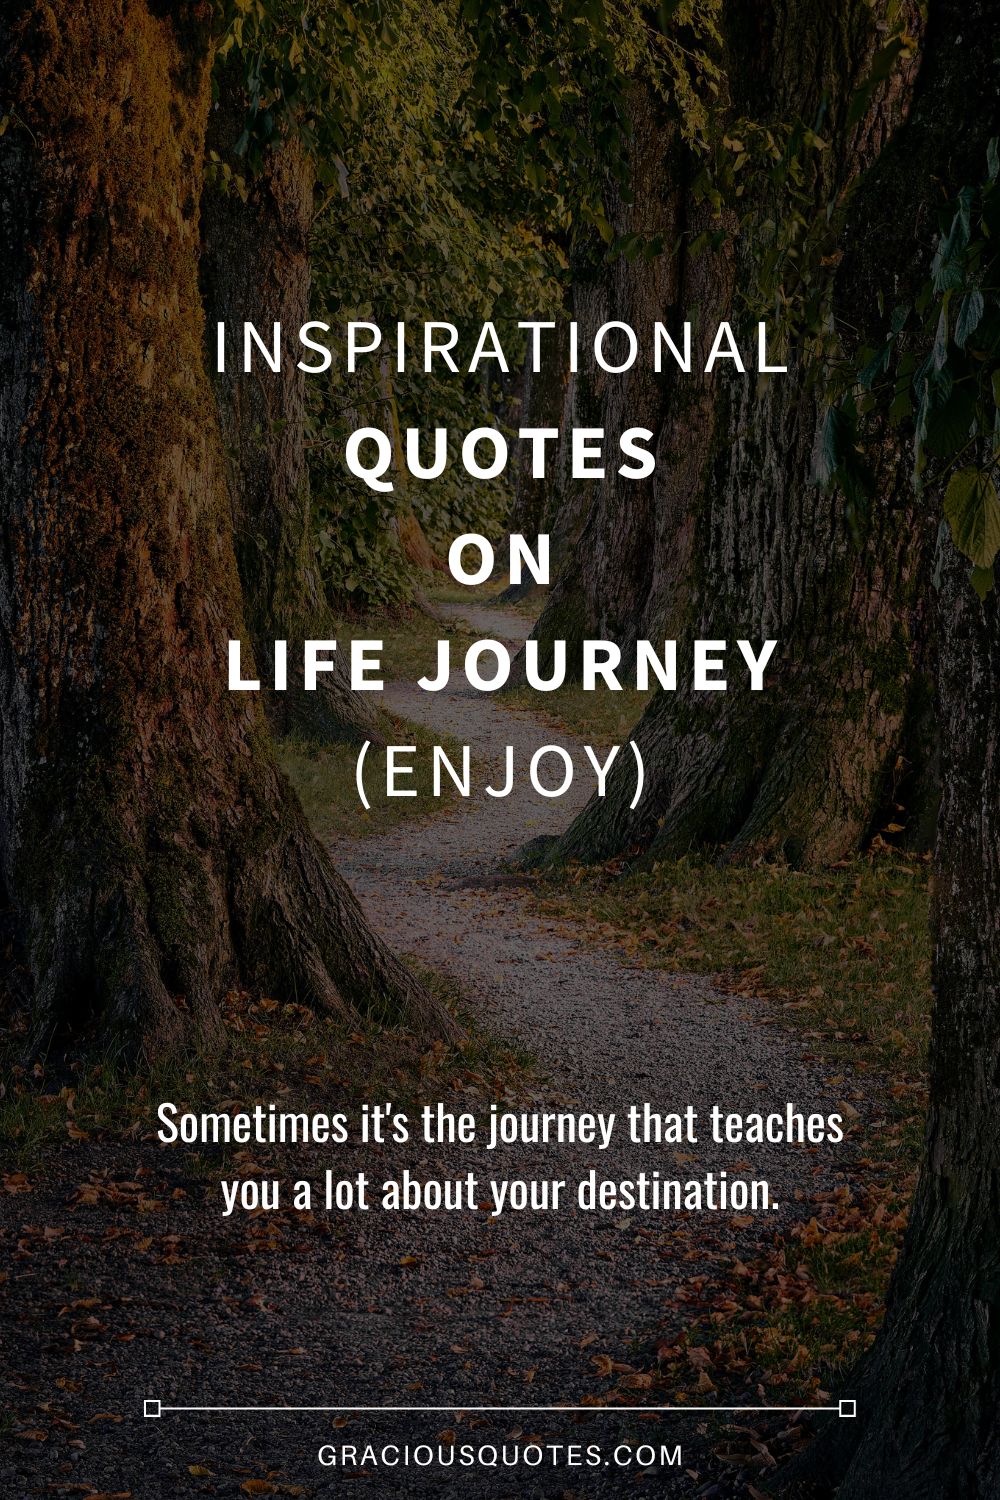 Inspirational Quotes on Life Journey (ENJOY) - Gracious Quotes